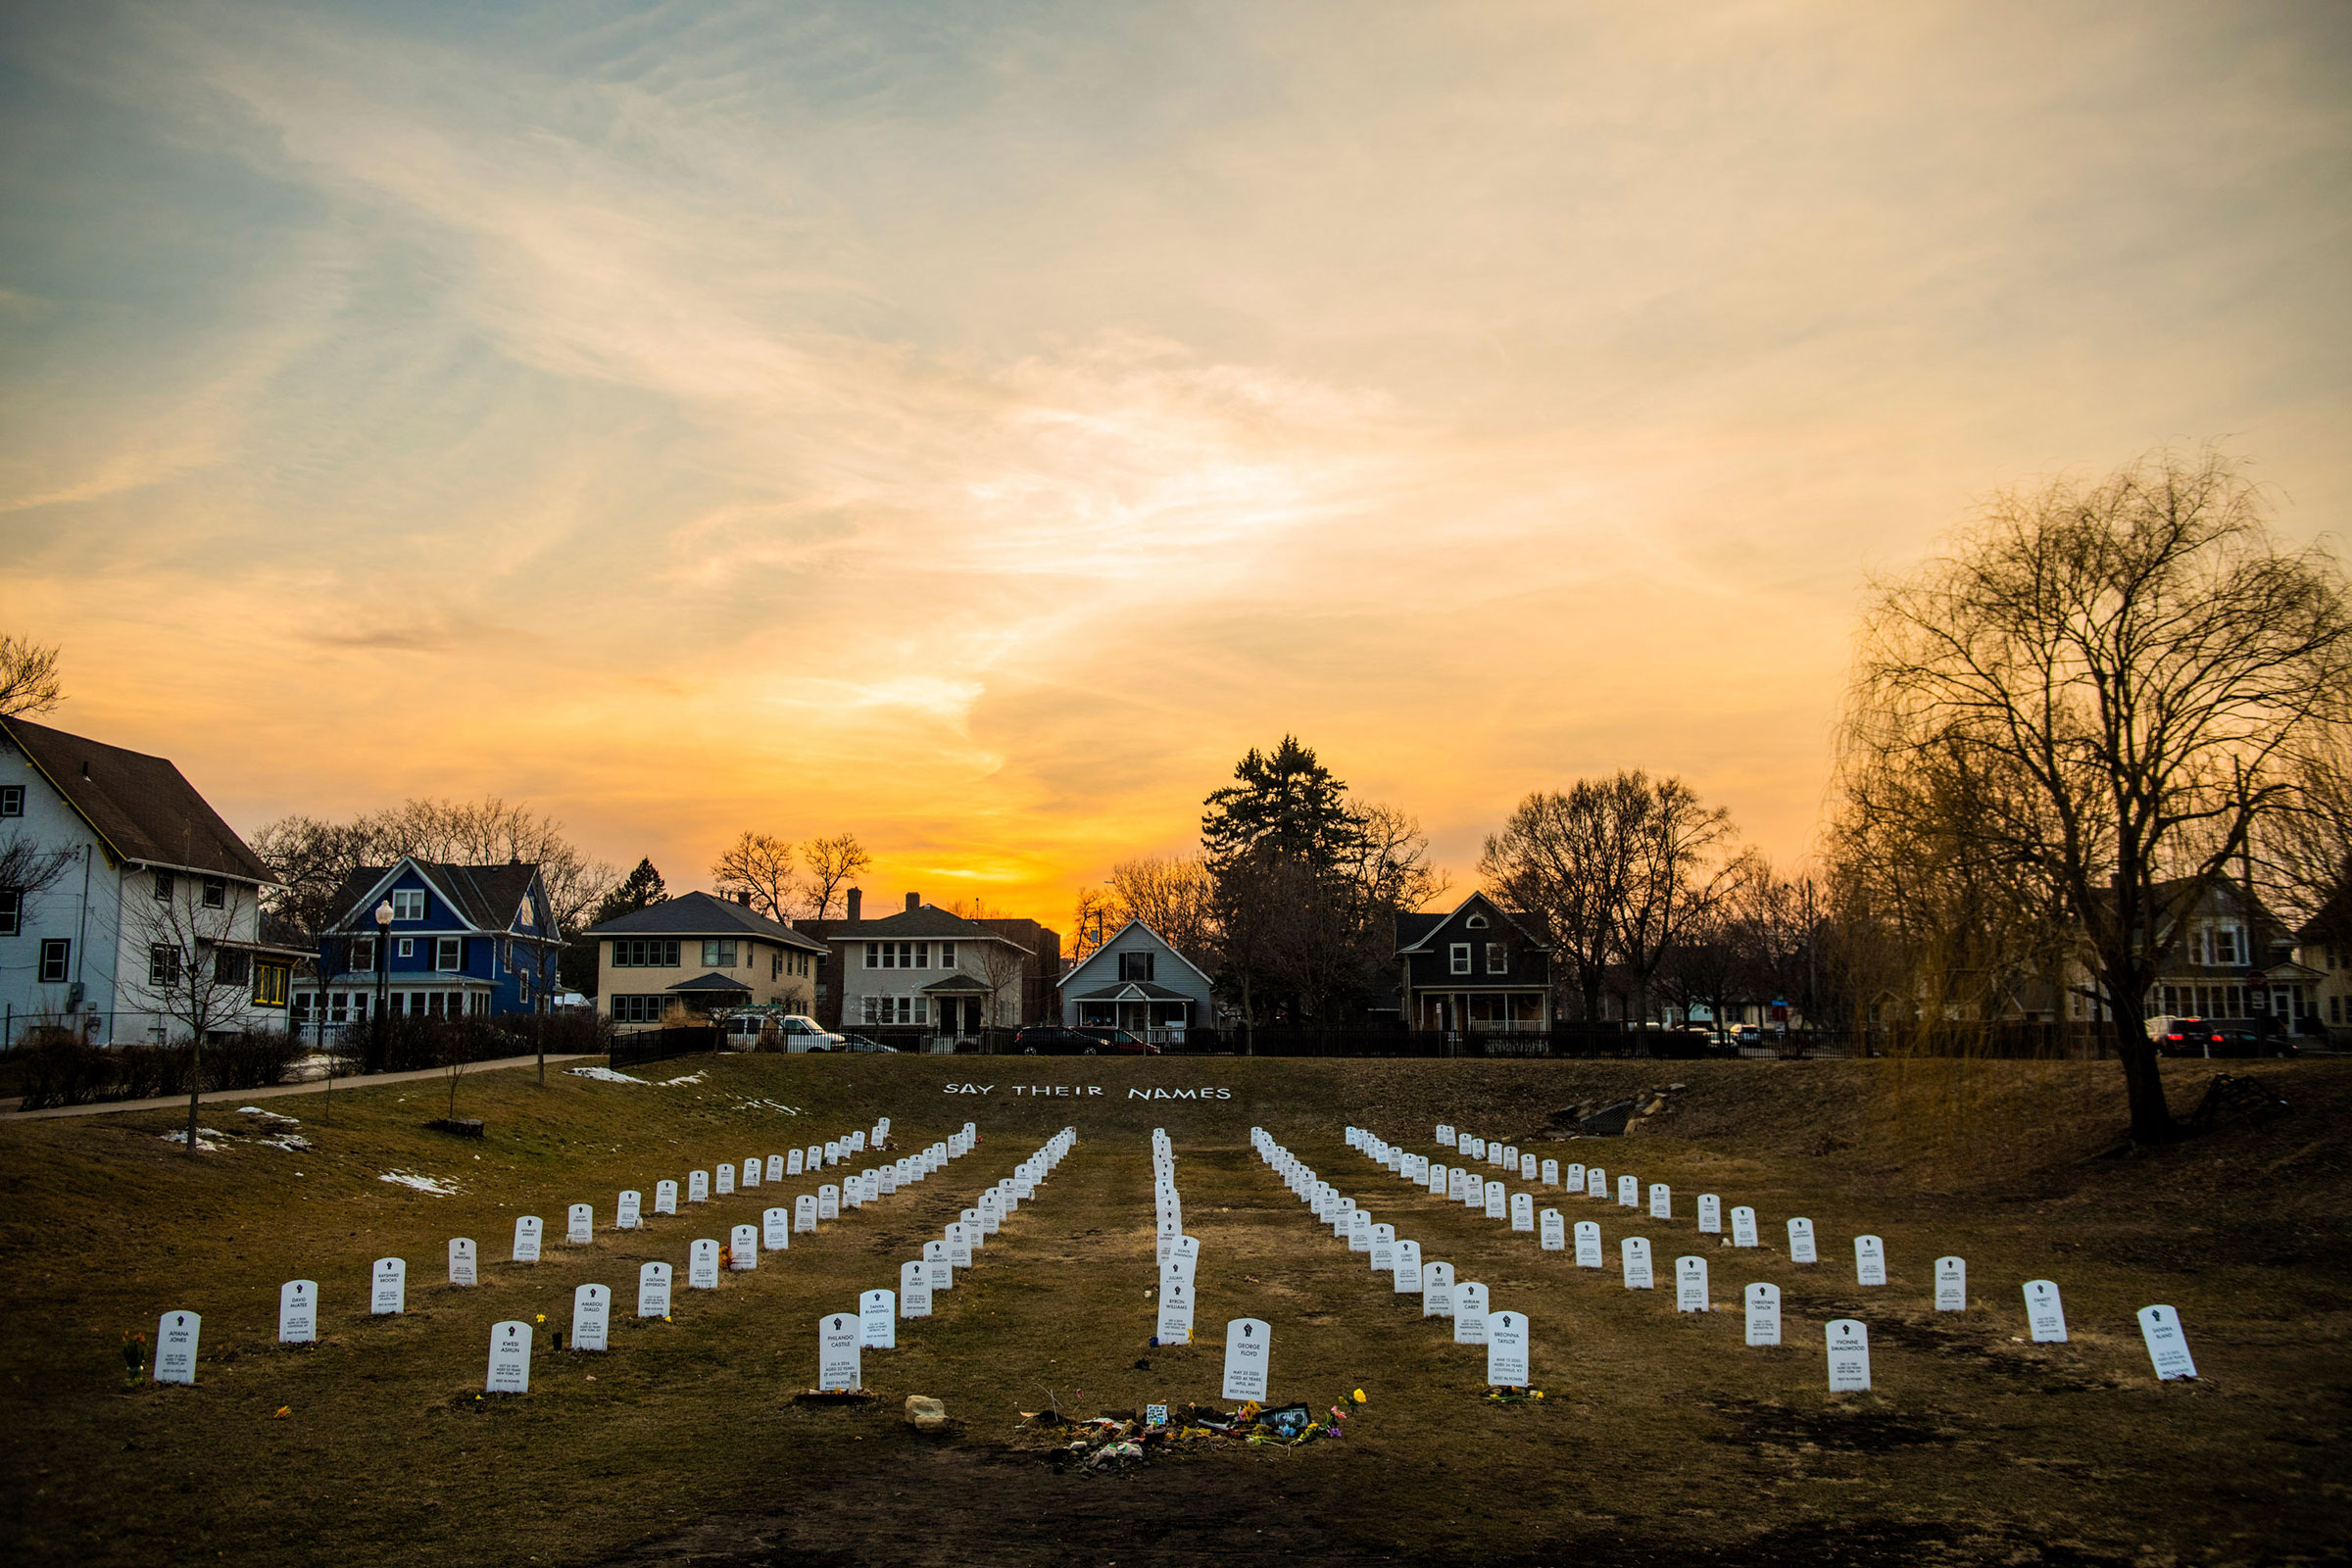 A view of "Say Their Names Cemetery" on March 9, 2021 in Minneapolis, Minnesota. (Chris Tuite—ImageSPACE/AP)